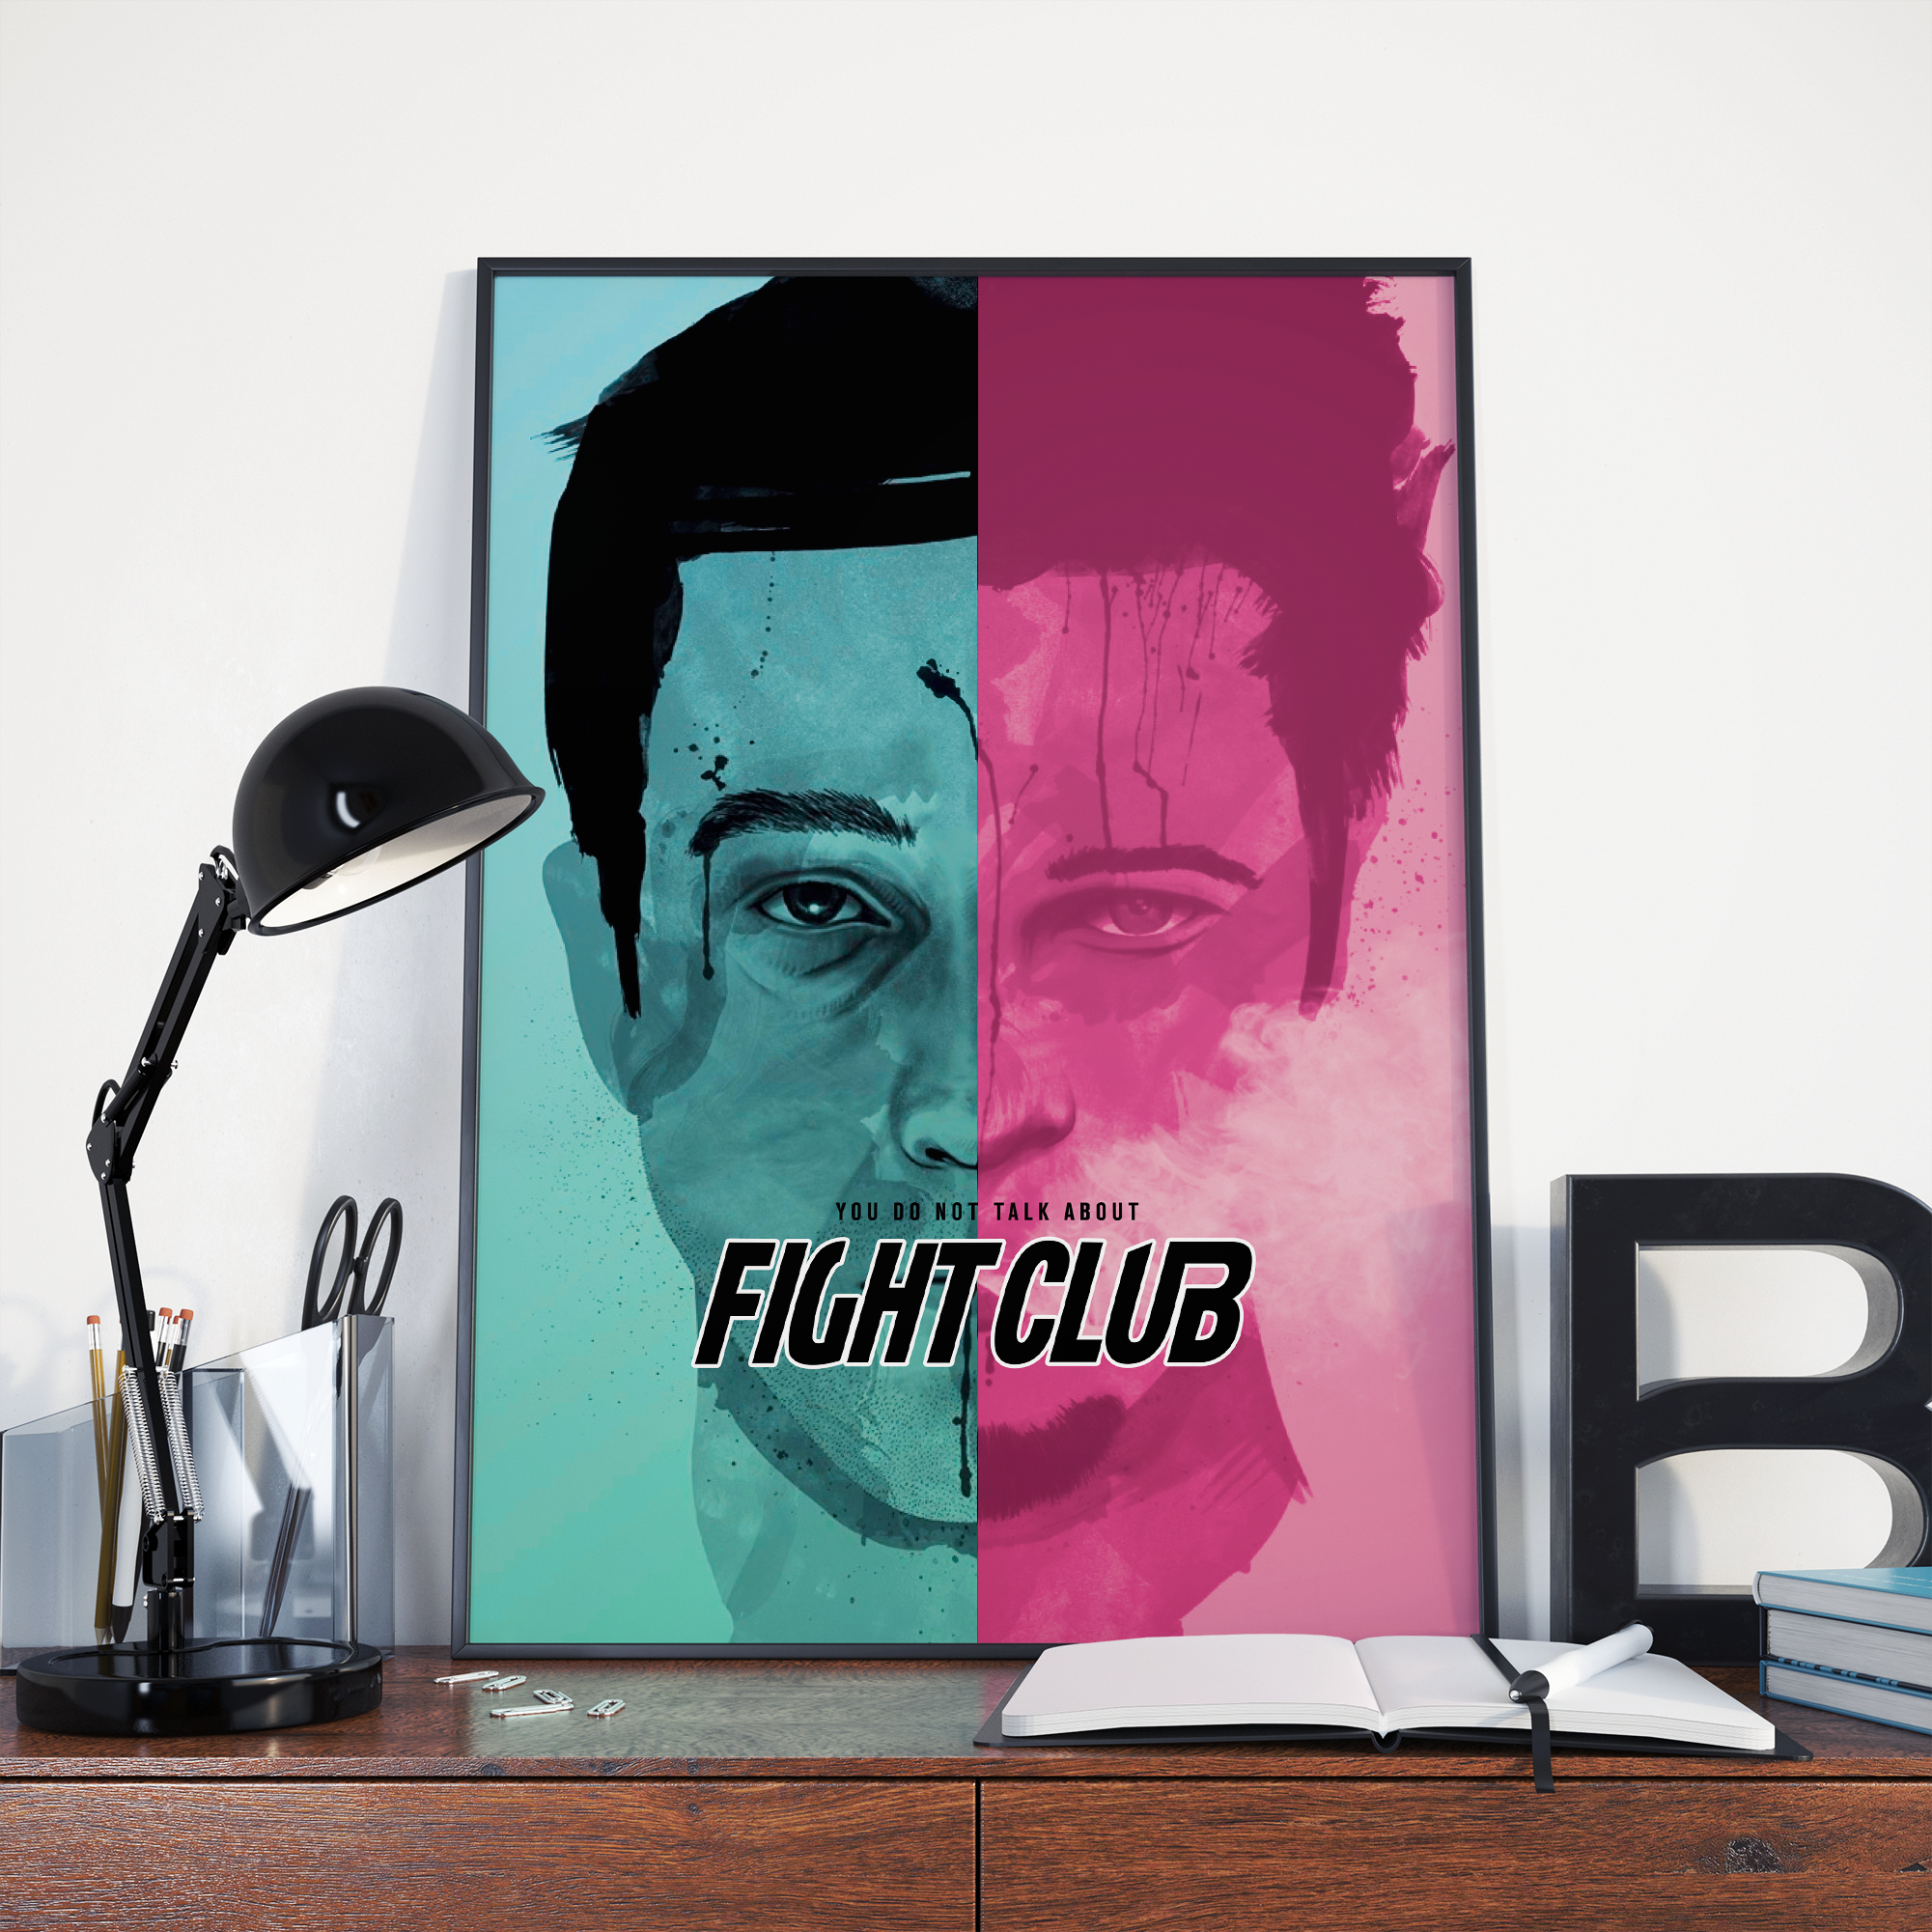 https://www.igdprints.com/wp-content/uploads/2022/02/fight-club-movie-poster.png